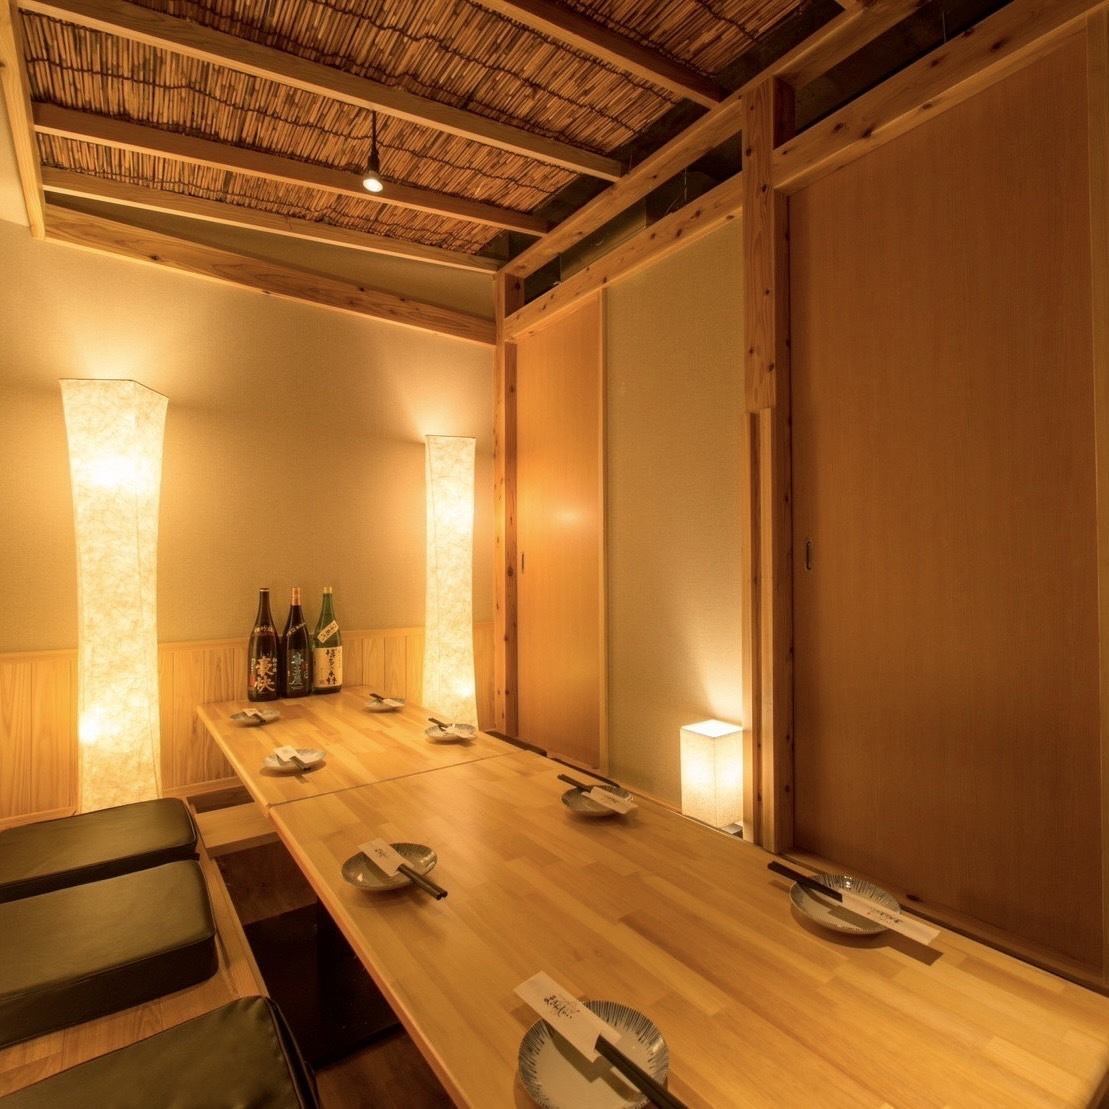 There are also seats that can be enjoyed in a private room space for 10 people or more ♪